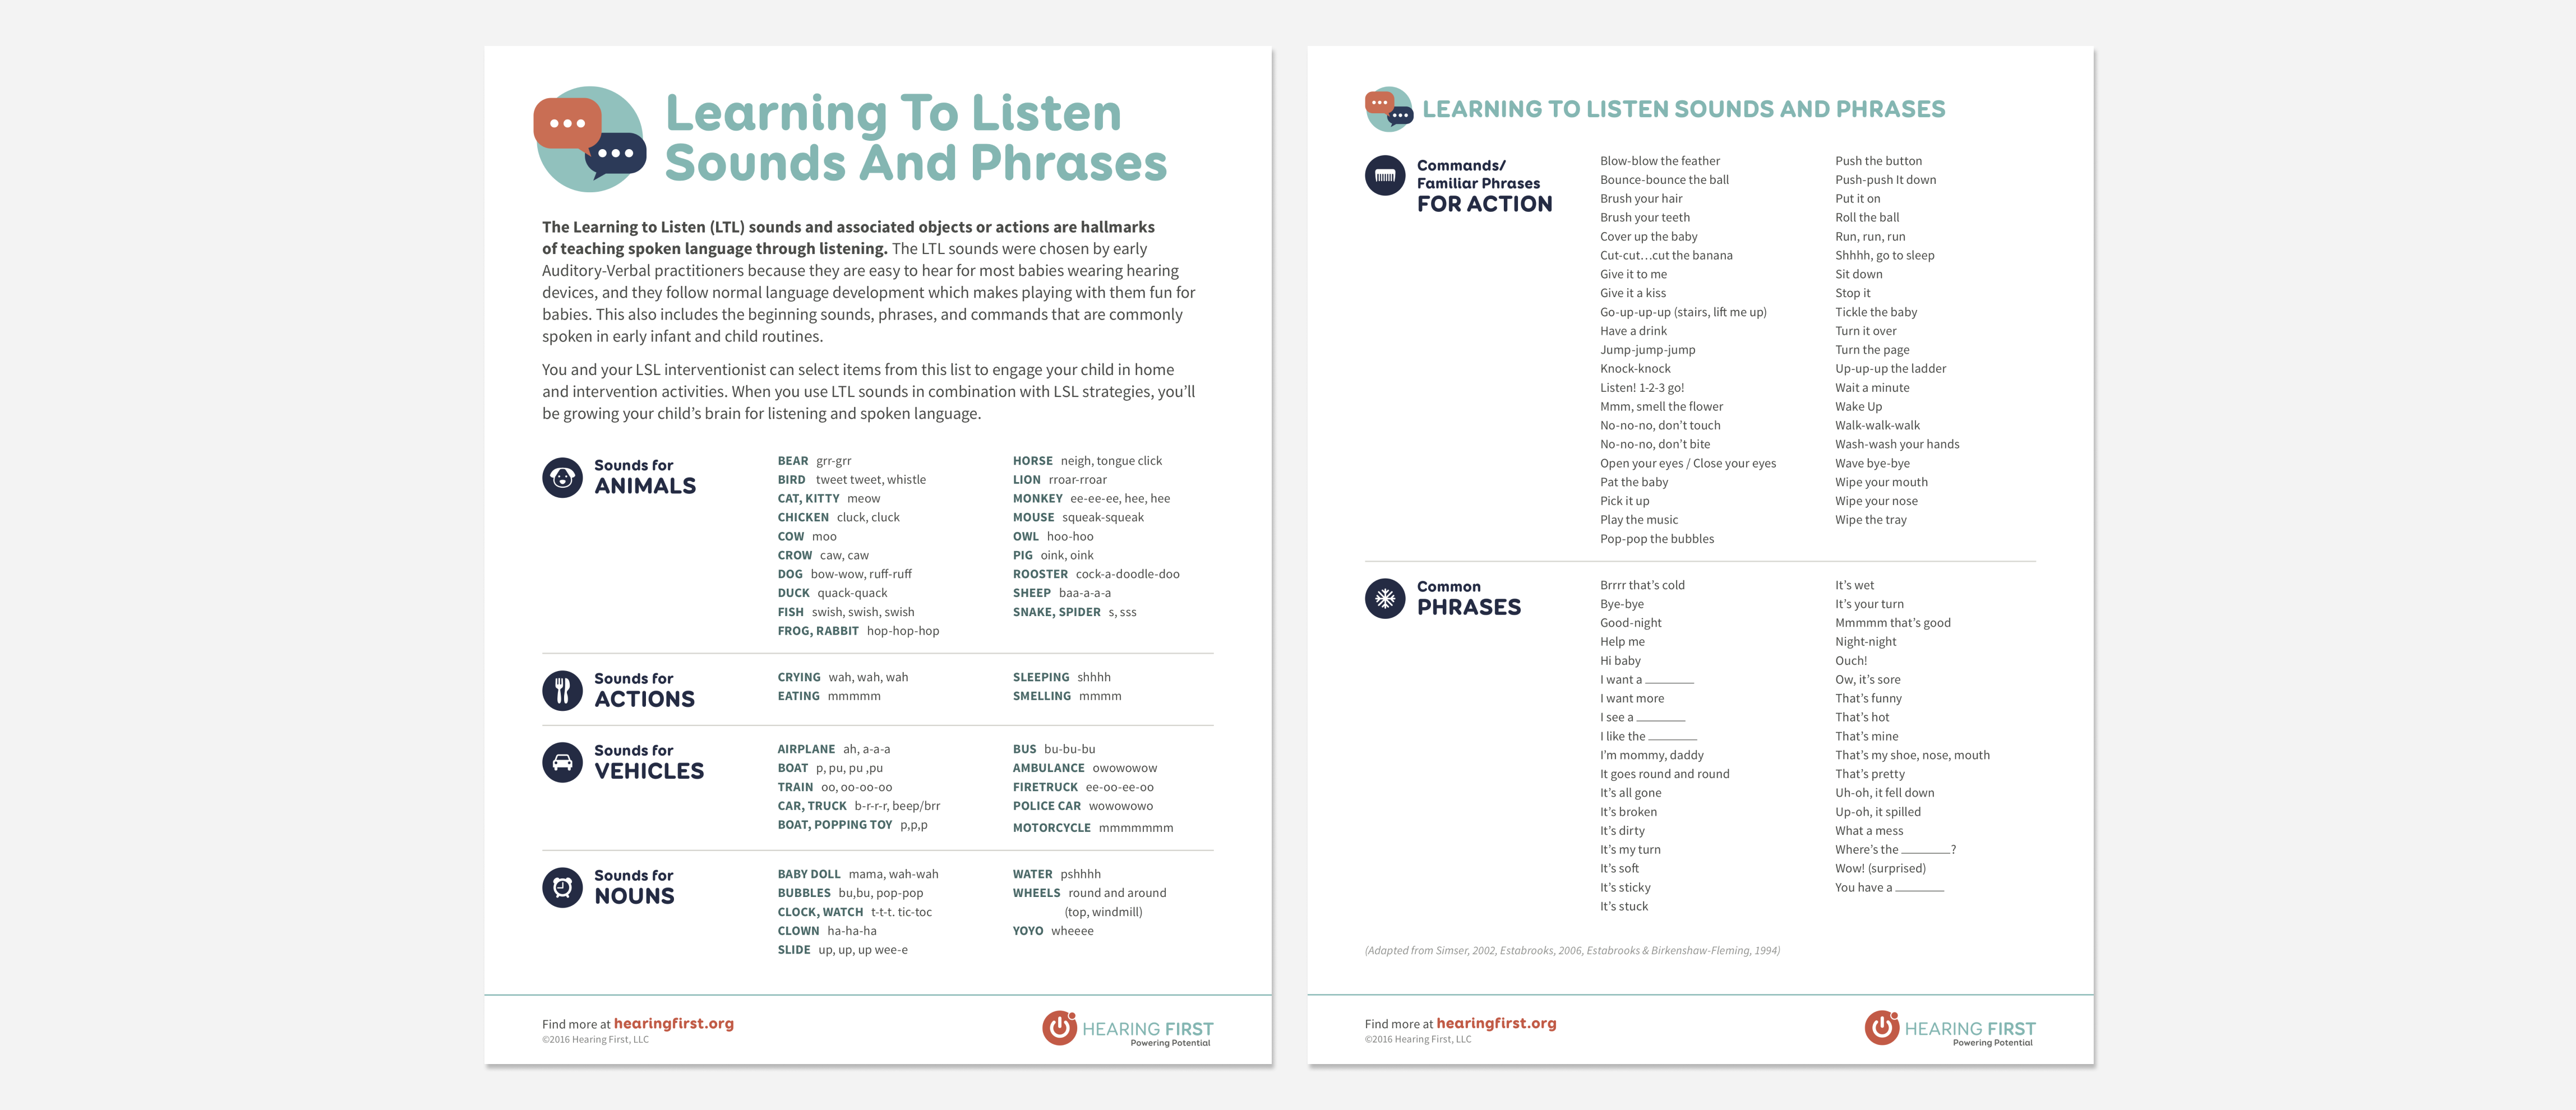 Image of learning to listen sounds handout.